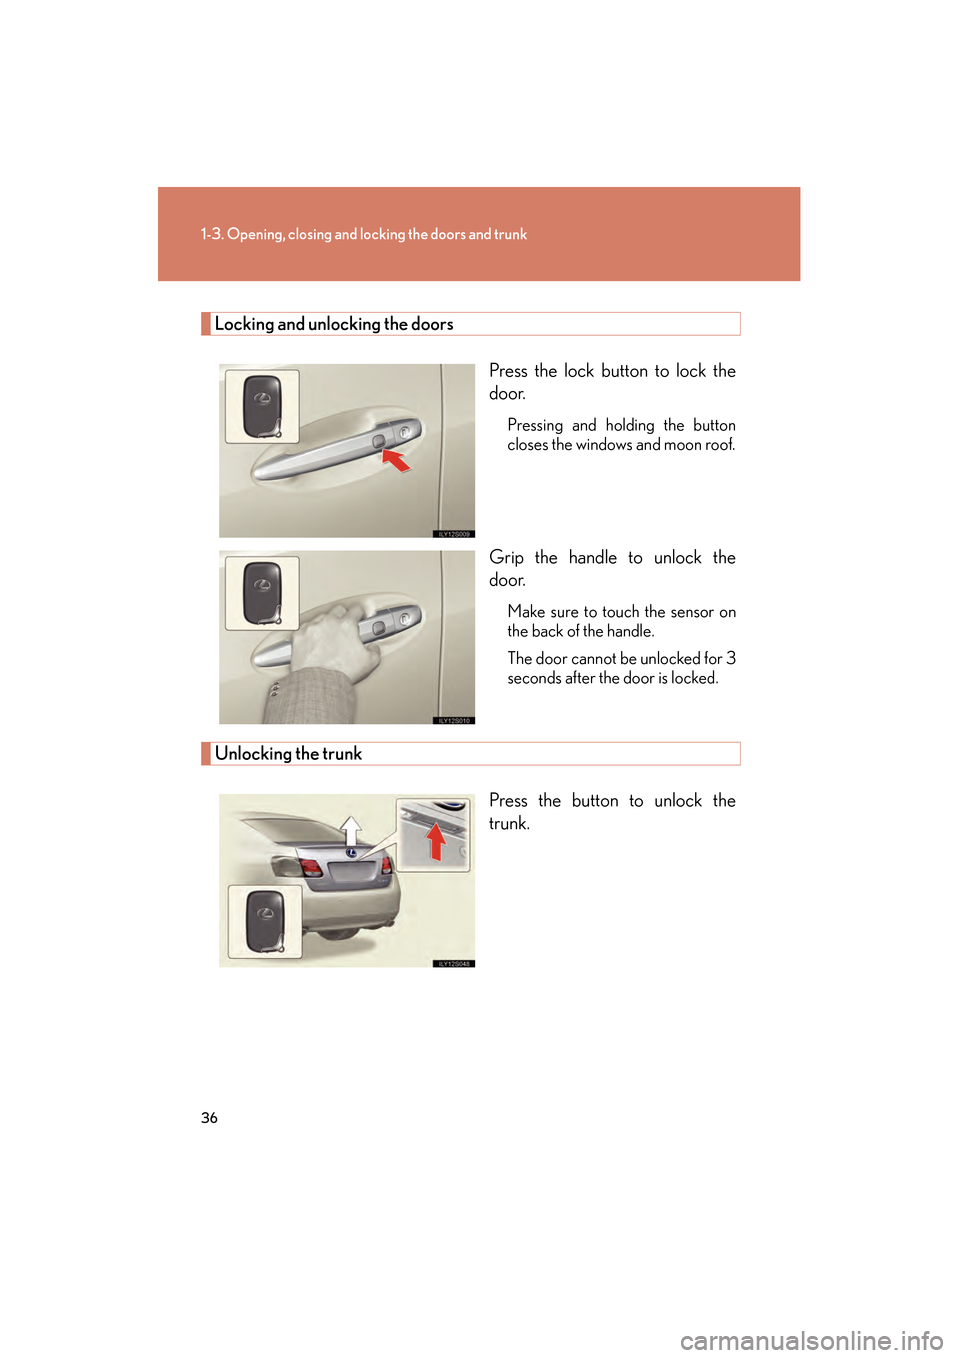 Lexus GS450h 2008 User Guide 36
1-3. Opening, closing and locking the doors and trunk
GS_HV_U
June 19, 2008 1:15 pm
Locking and unlocking the doorsPress the lock button to lock the
door.
Pressing and holding the button
closes the